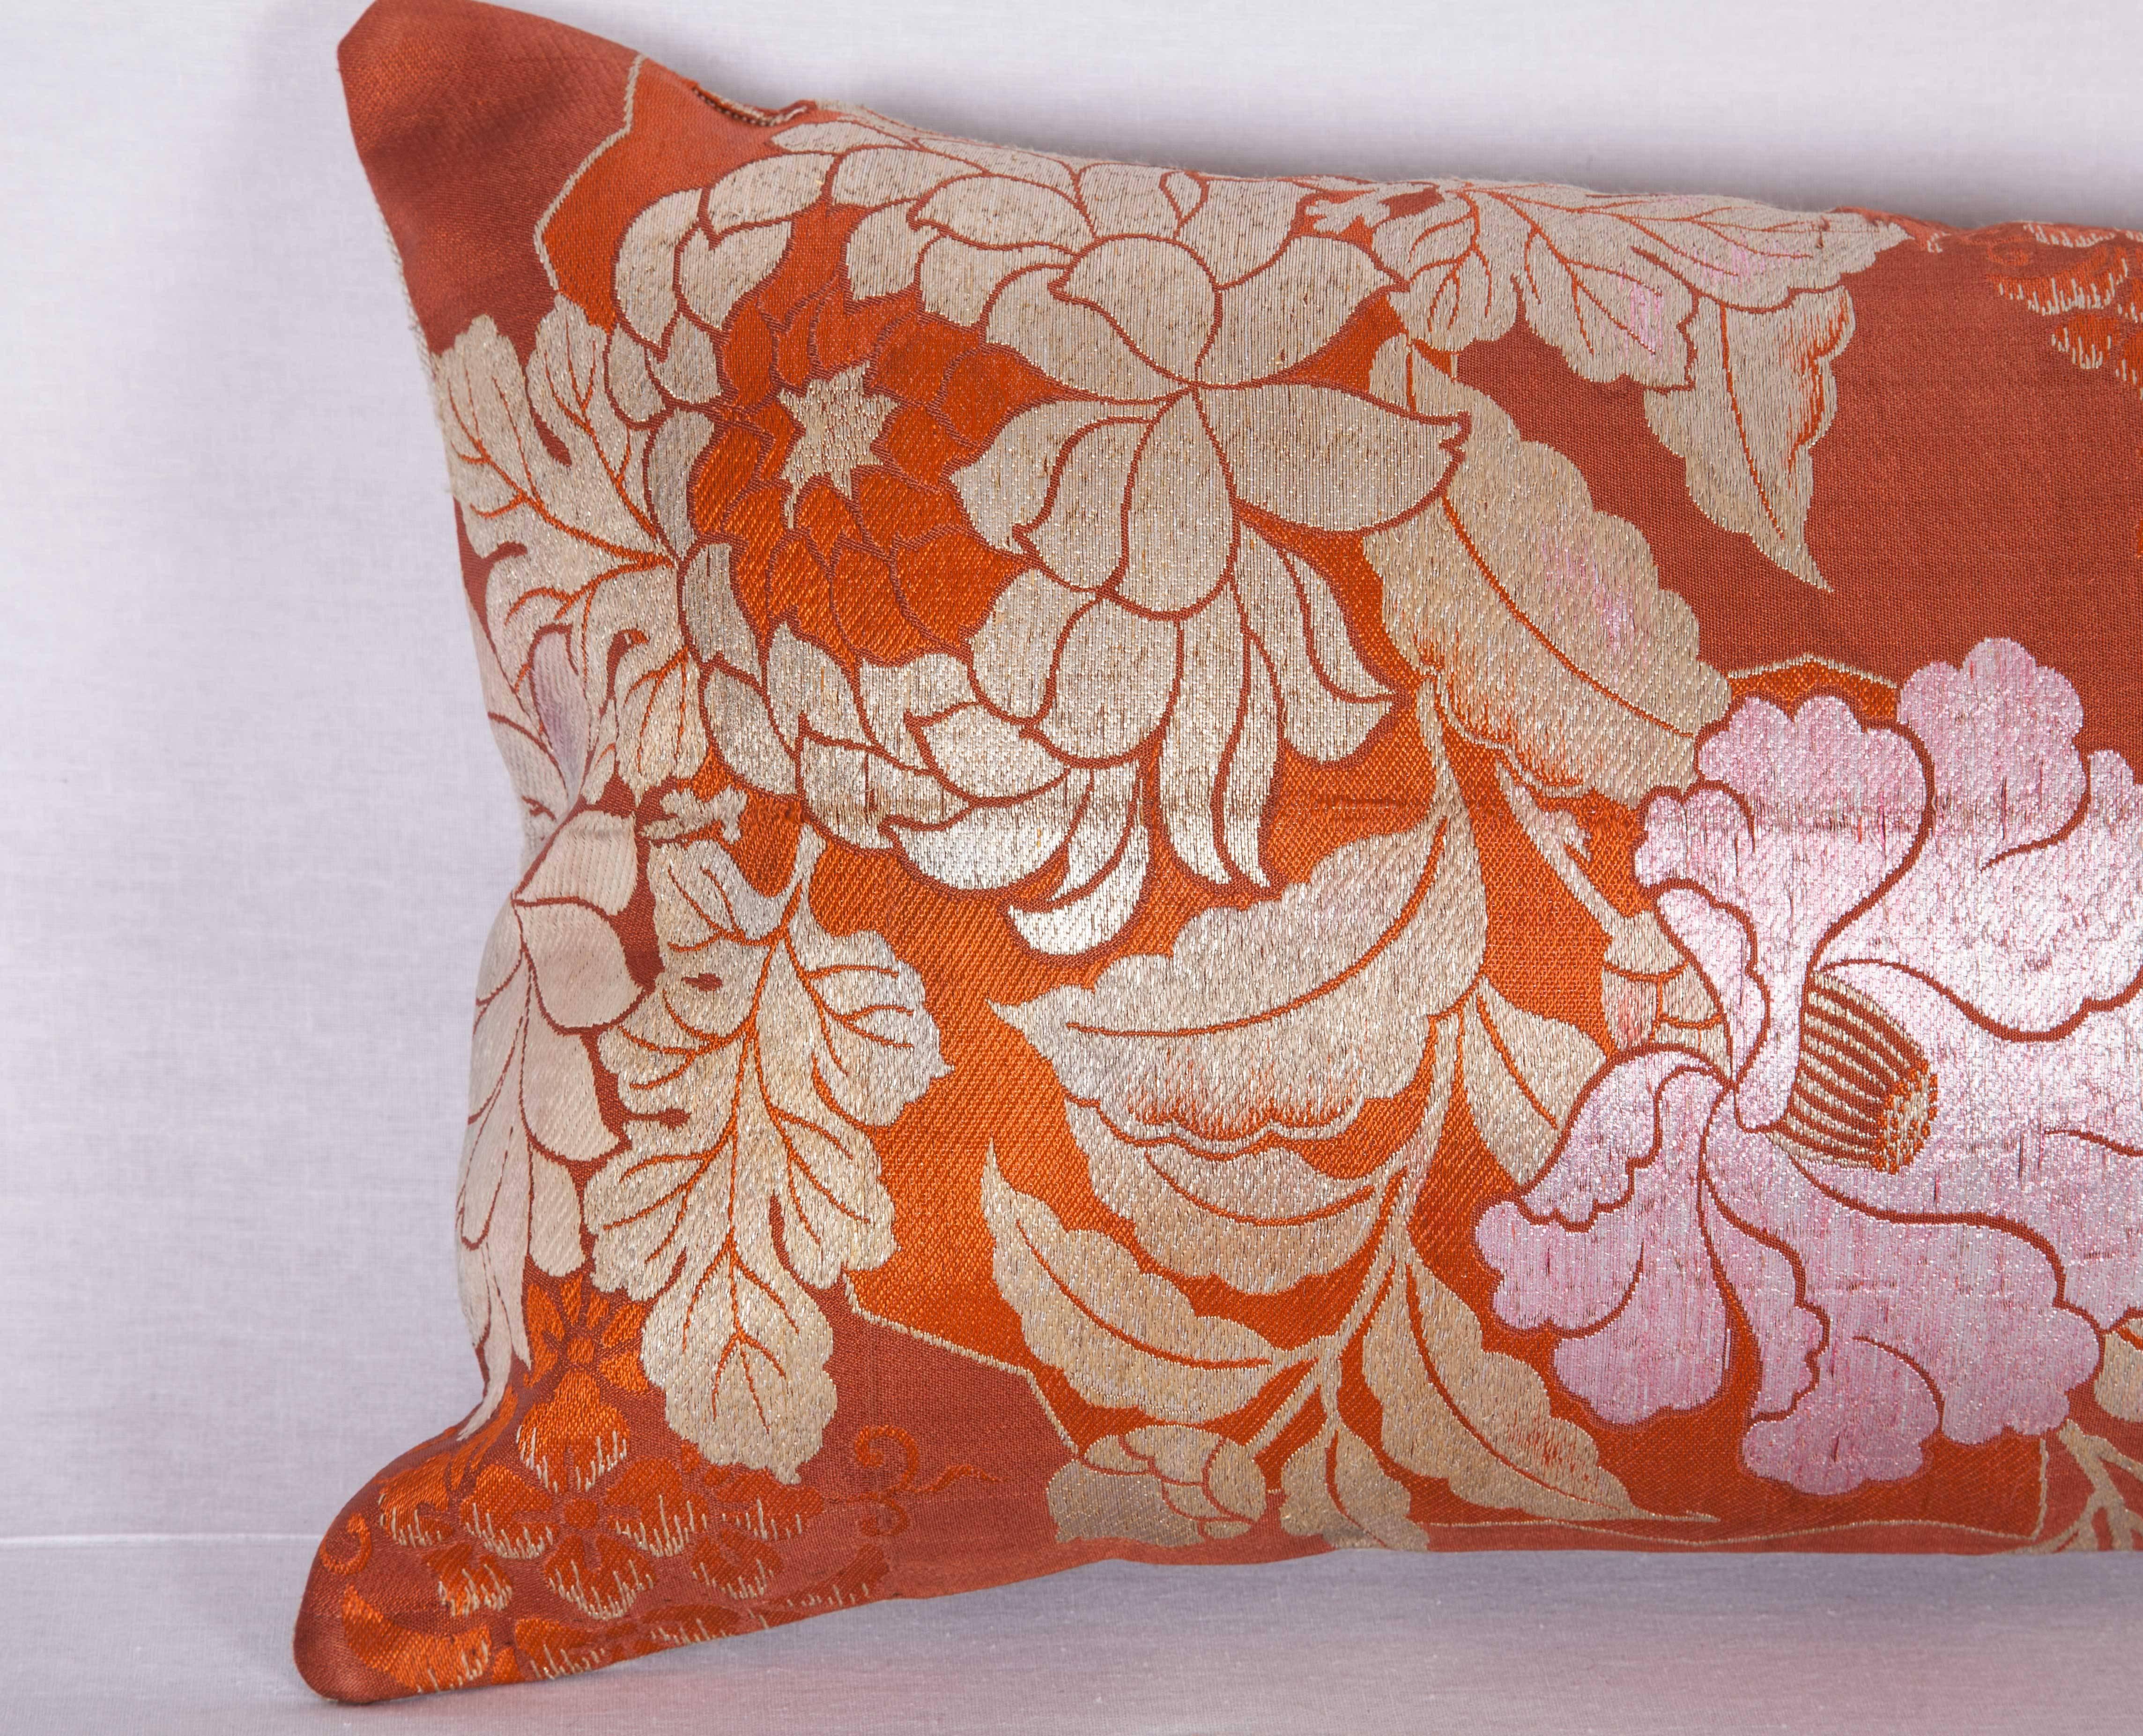 Japonisme Pillow Made Out of a Japanese, Mid-20th Century Obi